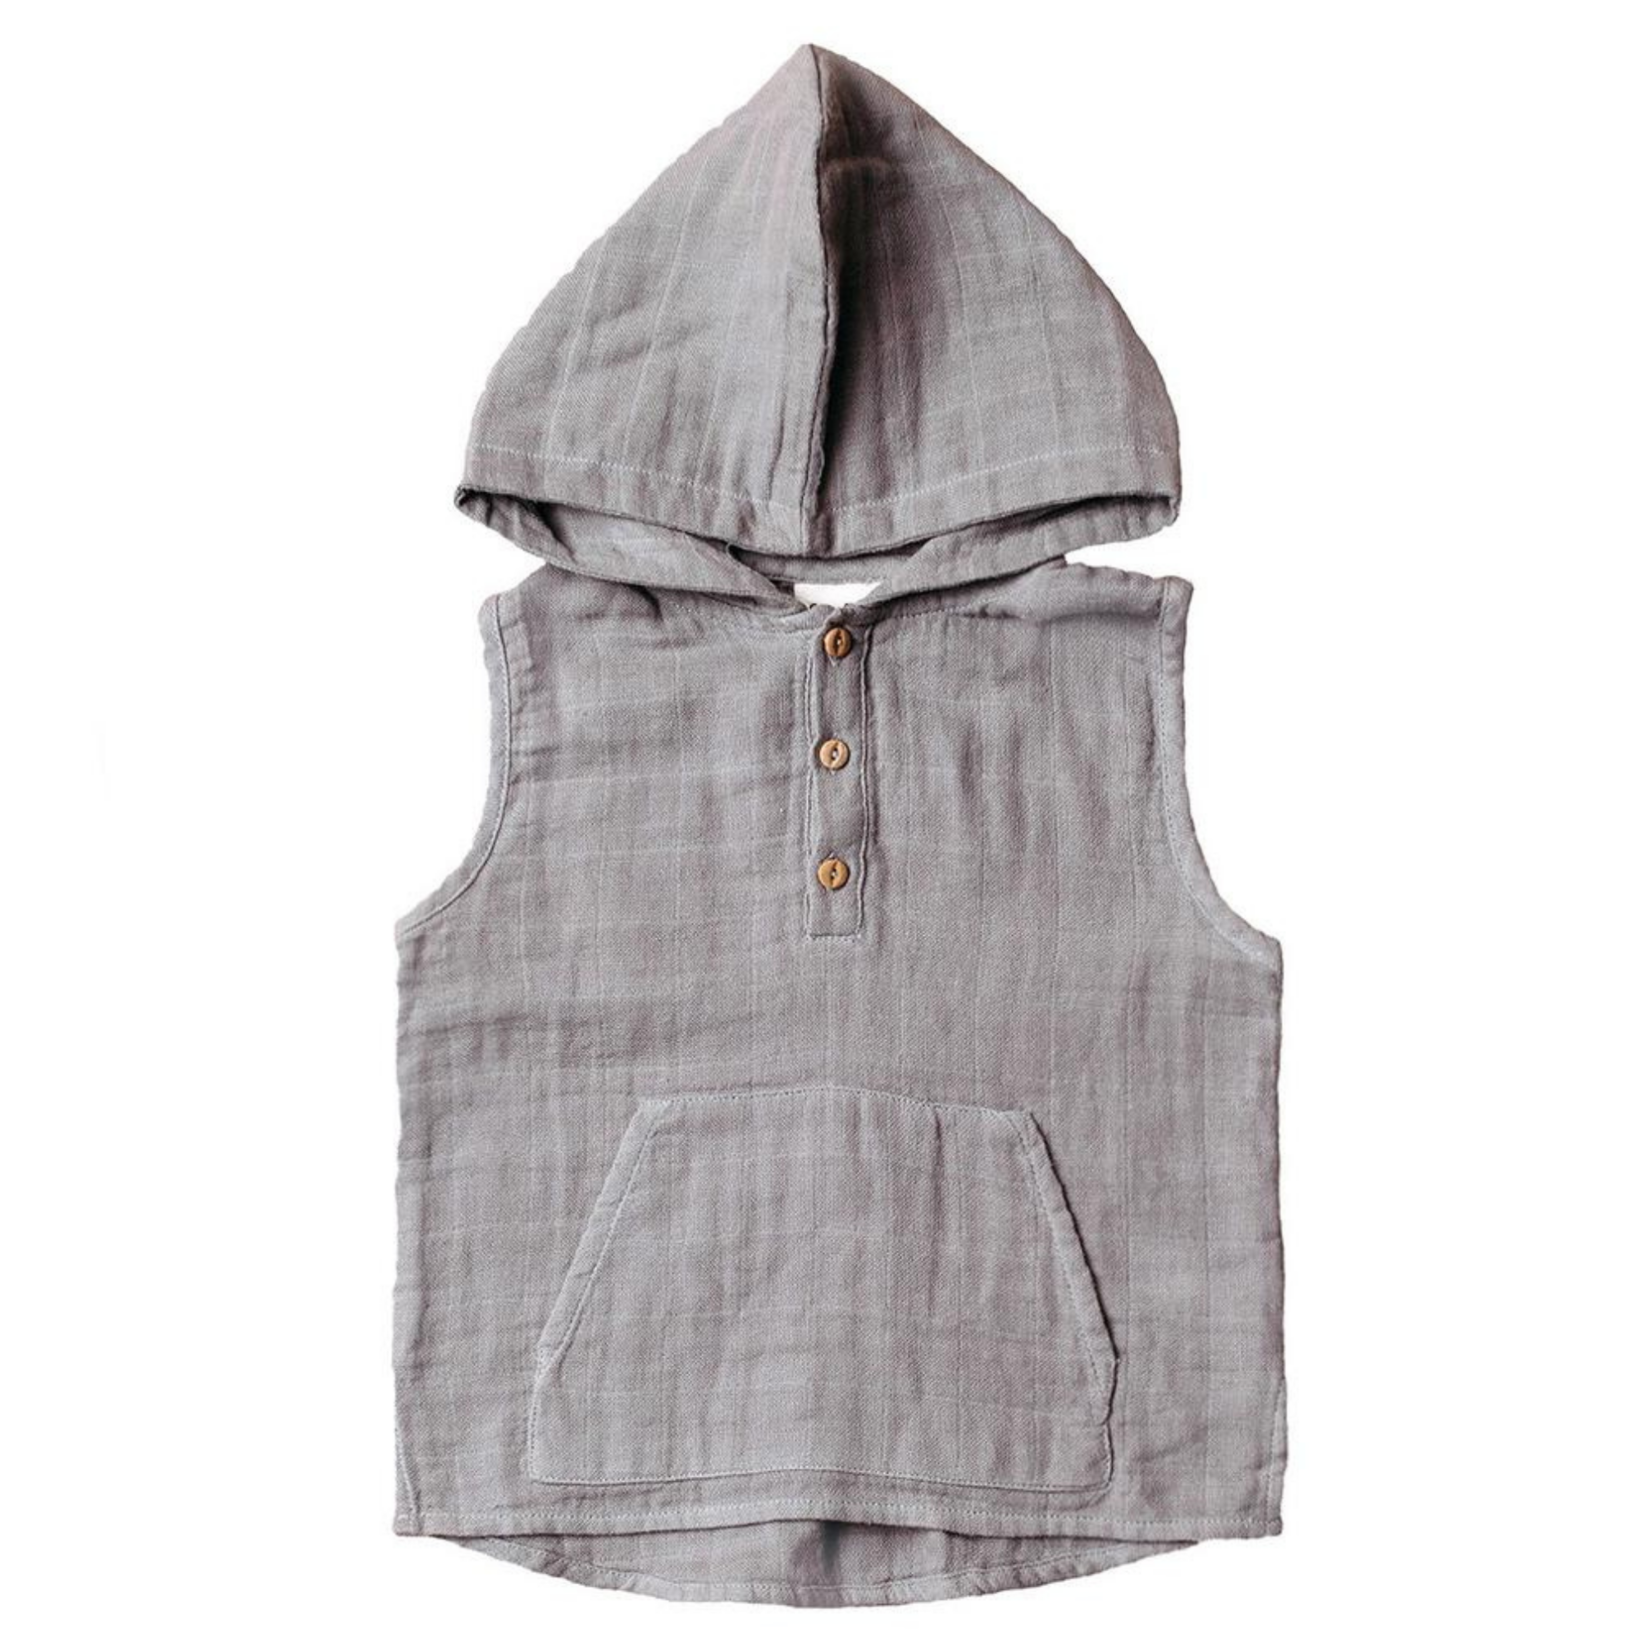 city mouse sleeveless hooded top